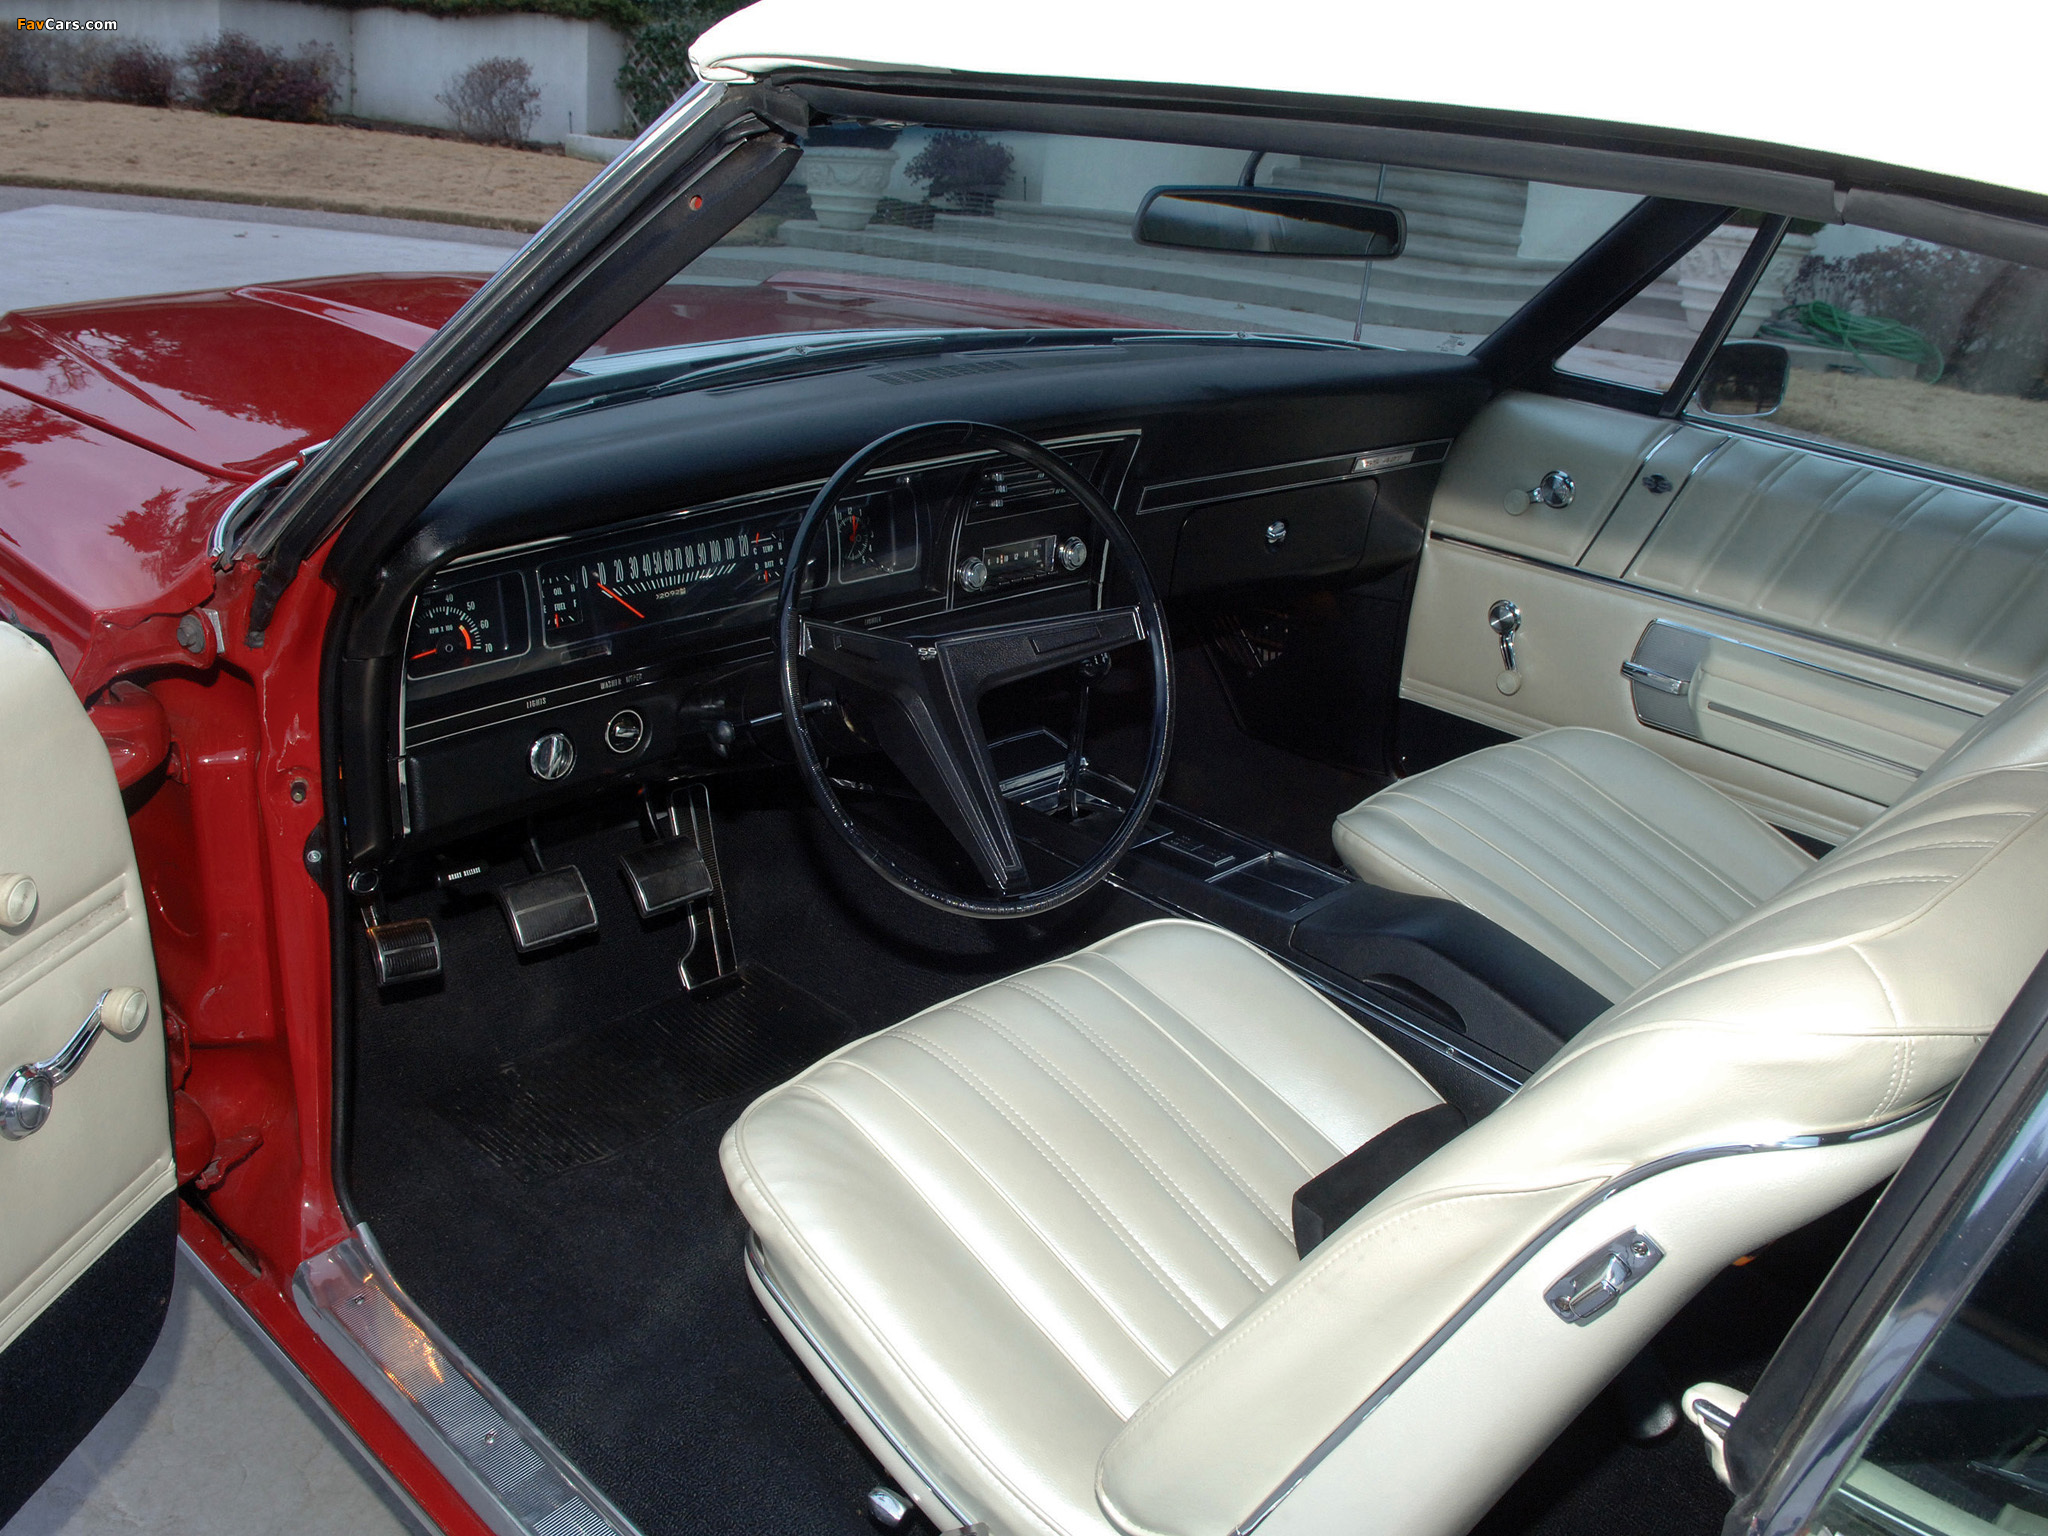 Images of Chevrolet Impala SS 427 Convertible 1968 (2048 x 1536)